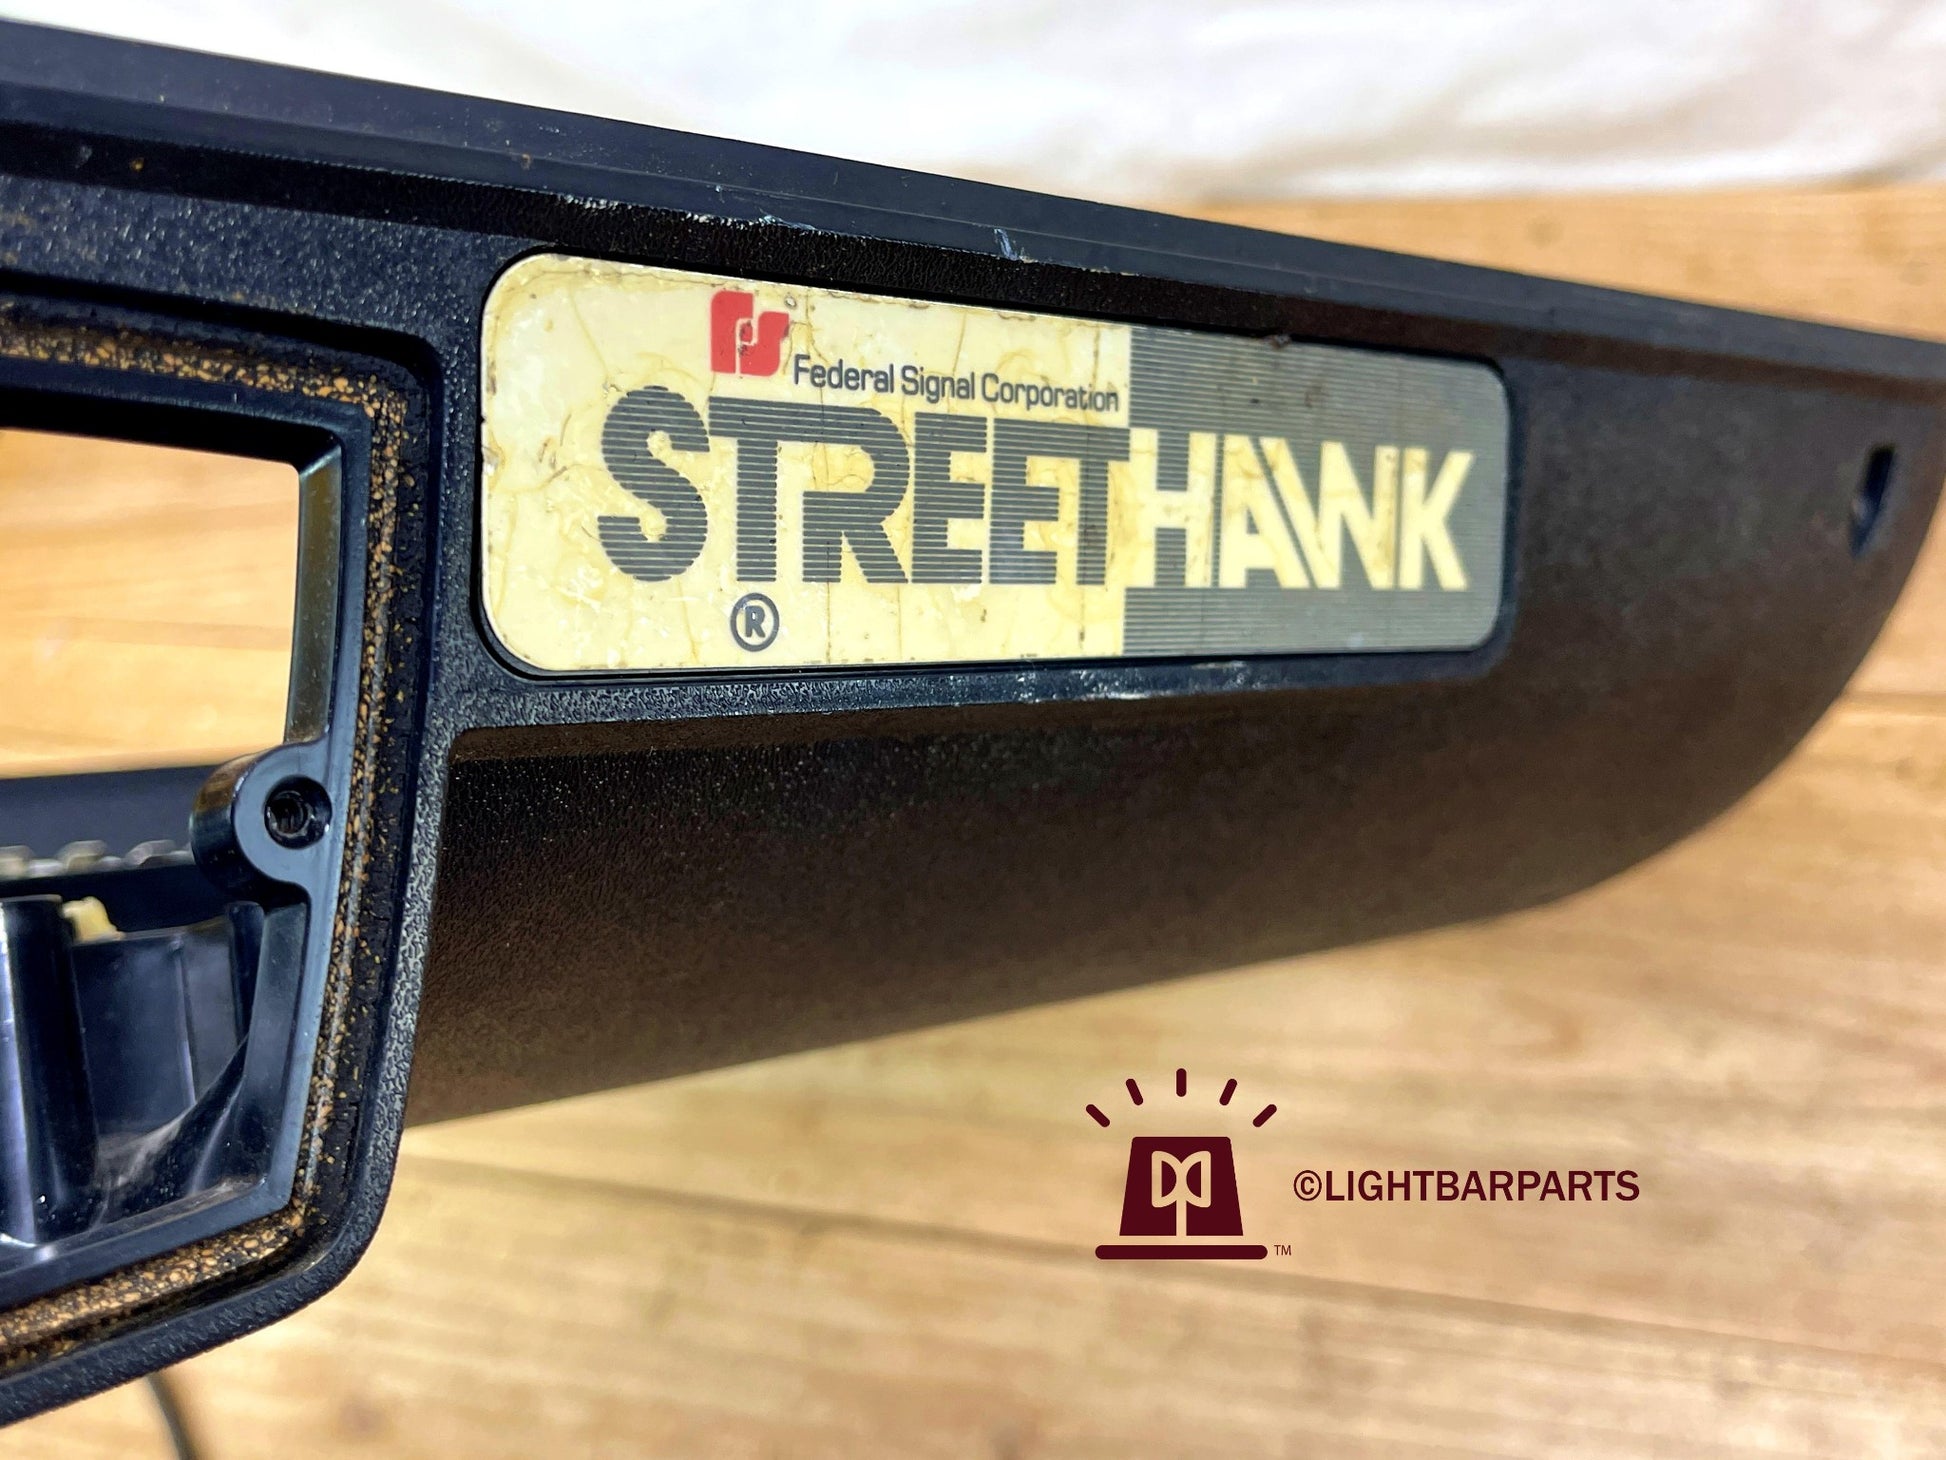 Federal Signal StreetHawk Lightbar - End Base Support Assembly